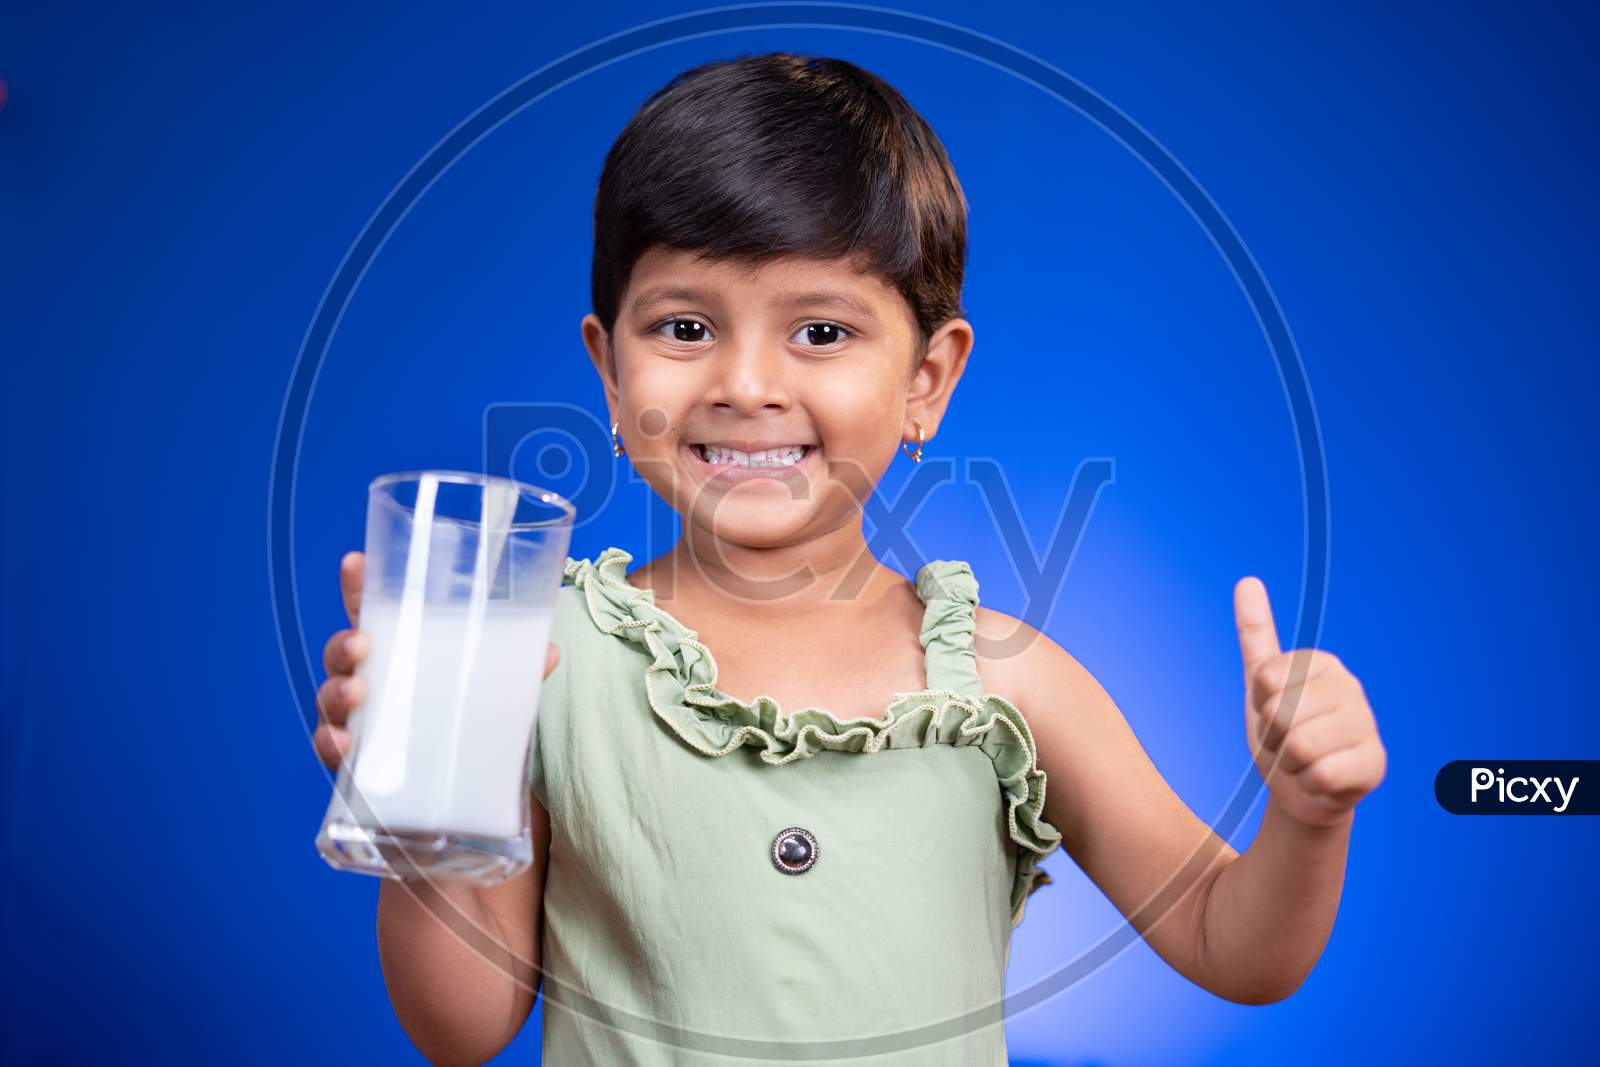 Little Girl Kid With Milk In Hand Showing Thumbs Up Sign On Blue Background - Concept Showing To Encouragement Or Recommending Milk For Children's Health